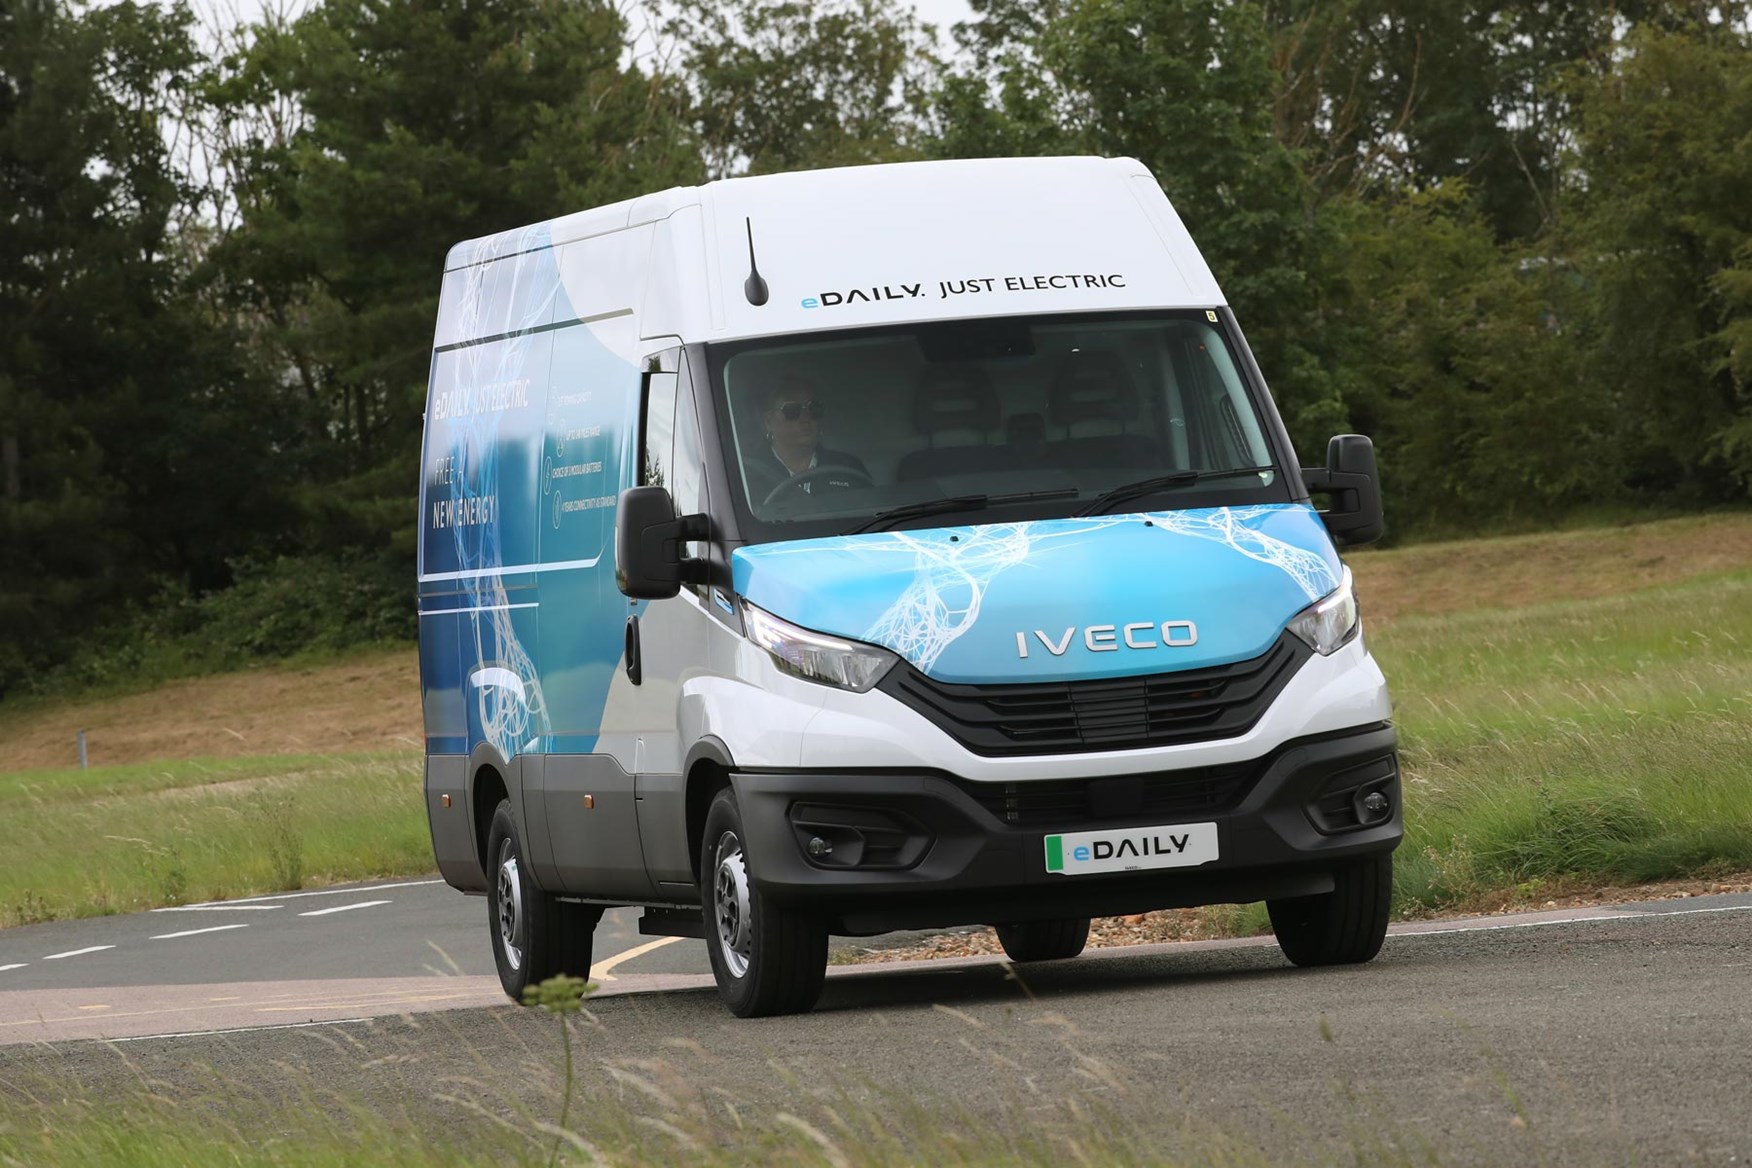 The Iveco eDaily is relaxed around town.